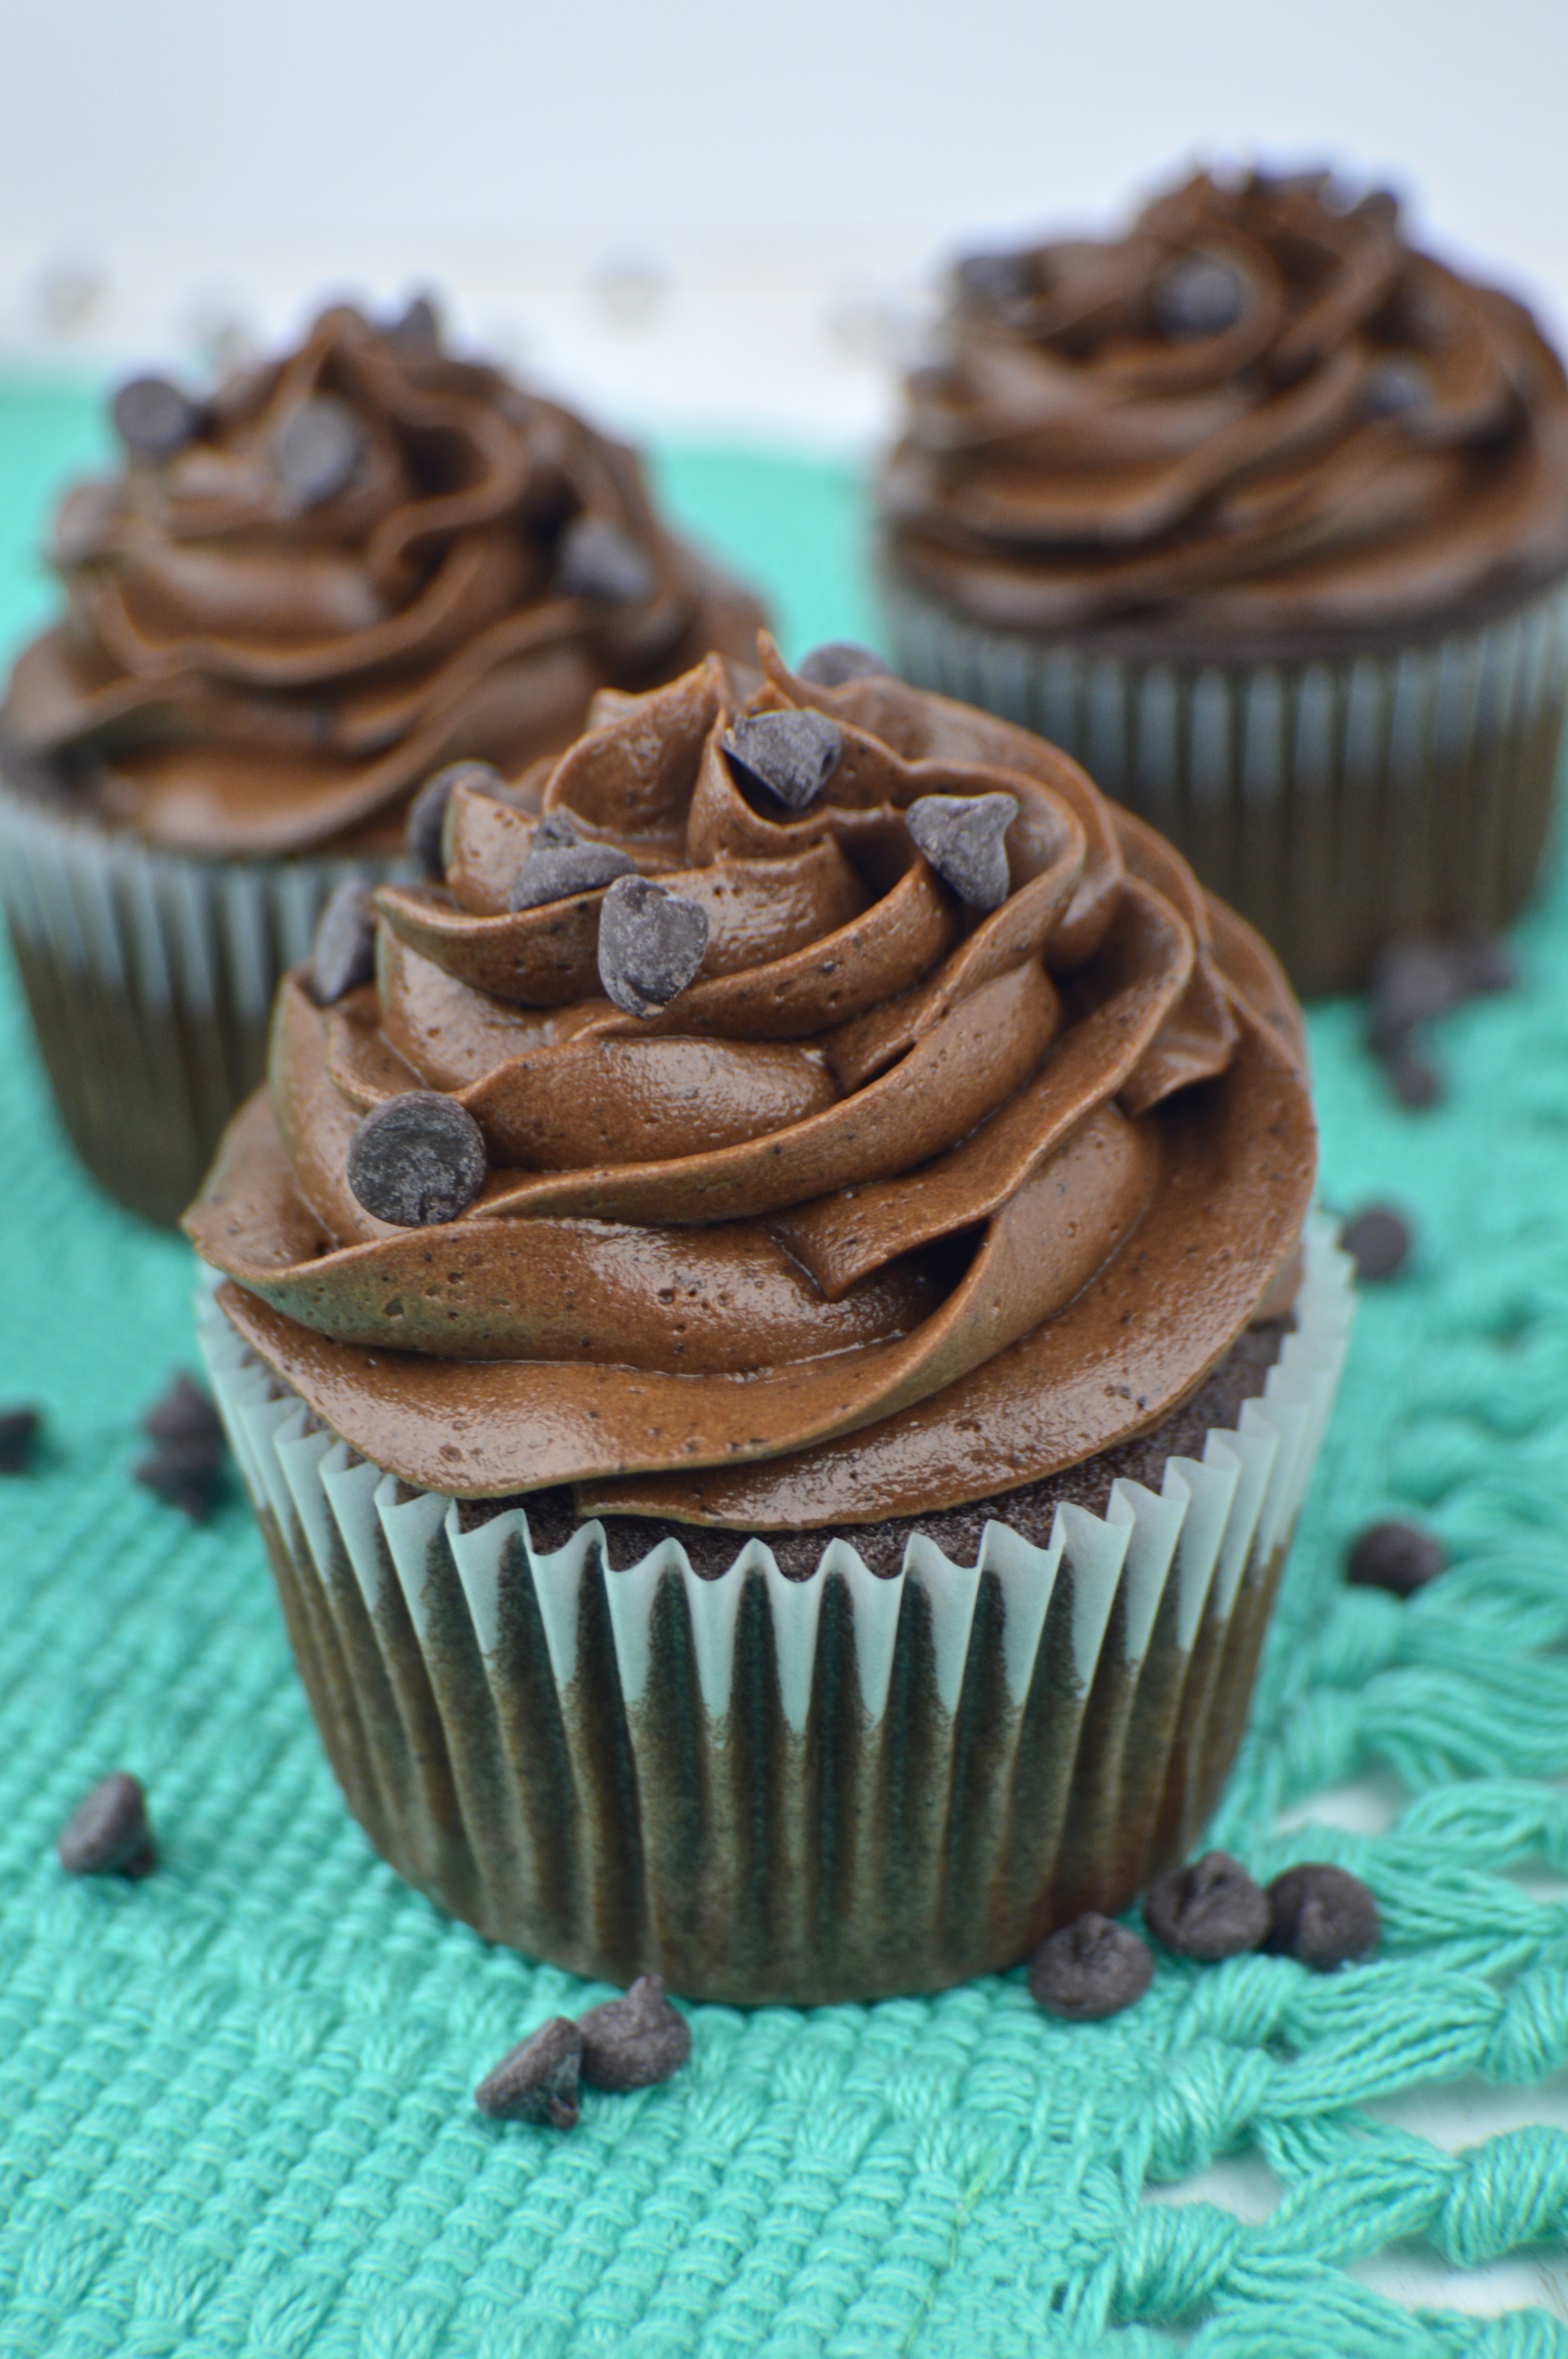 Cupcakes with Chocolate Frosting